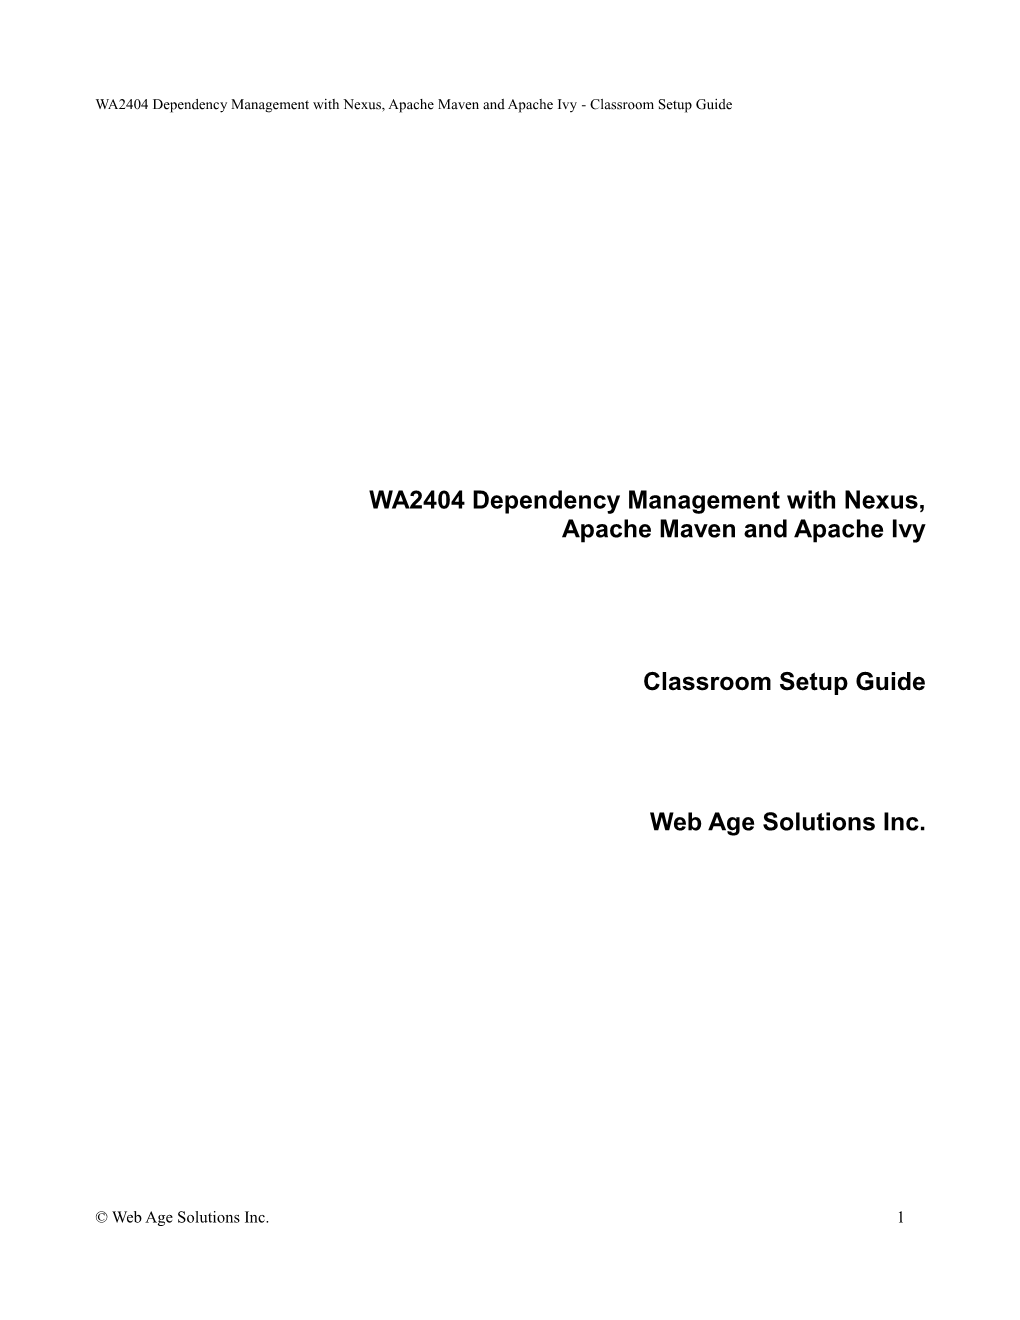 WA2404 Dependency Management with Nexus, Apache Maven and Apache Ivy - Classroom Setup Guide